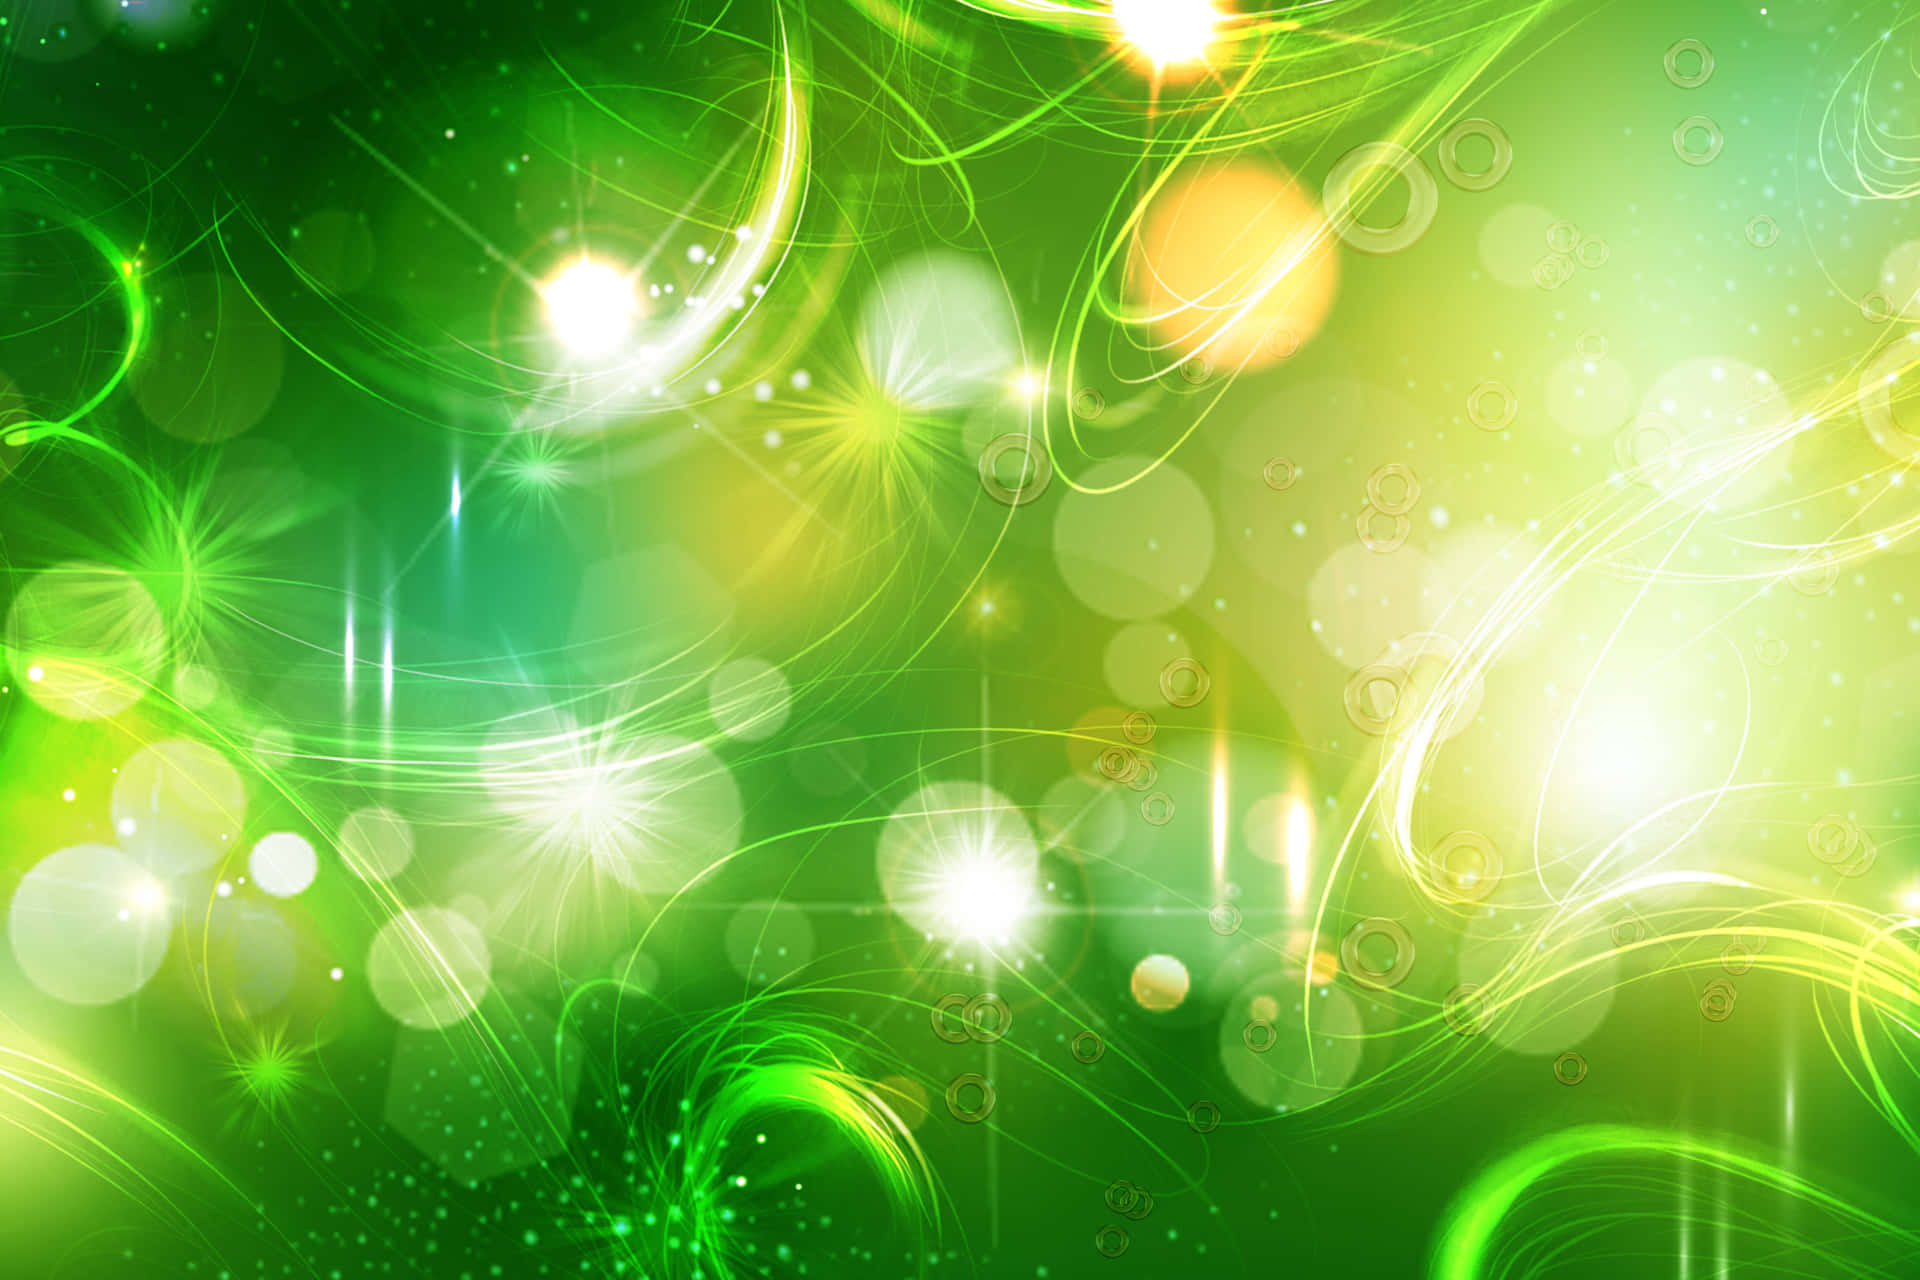 Bright and lively abstract green background